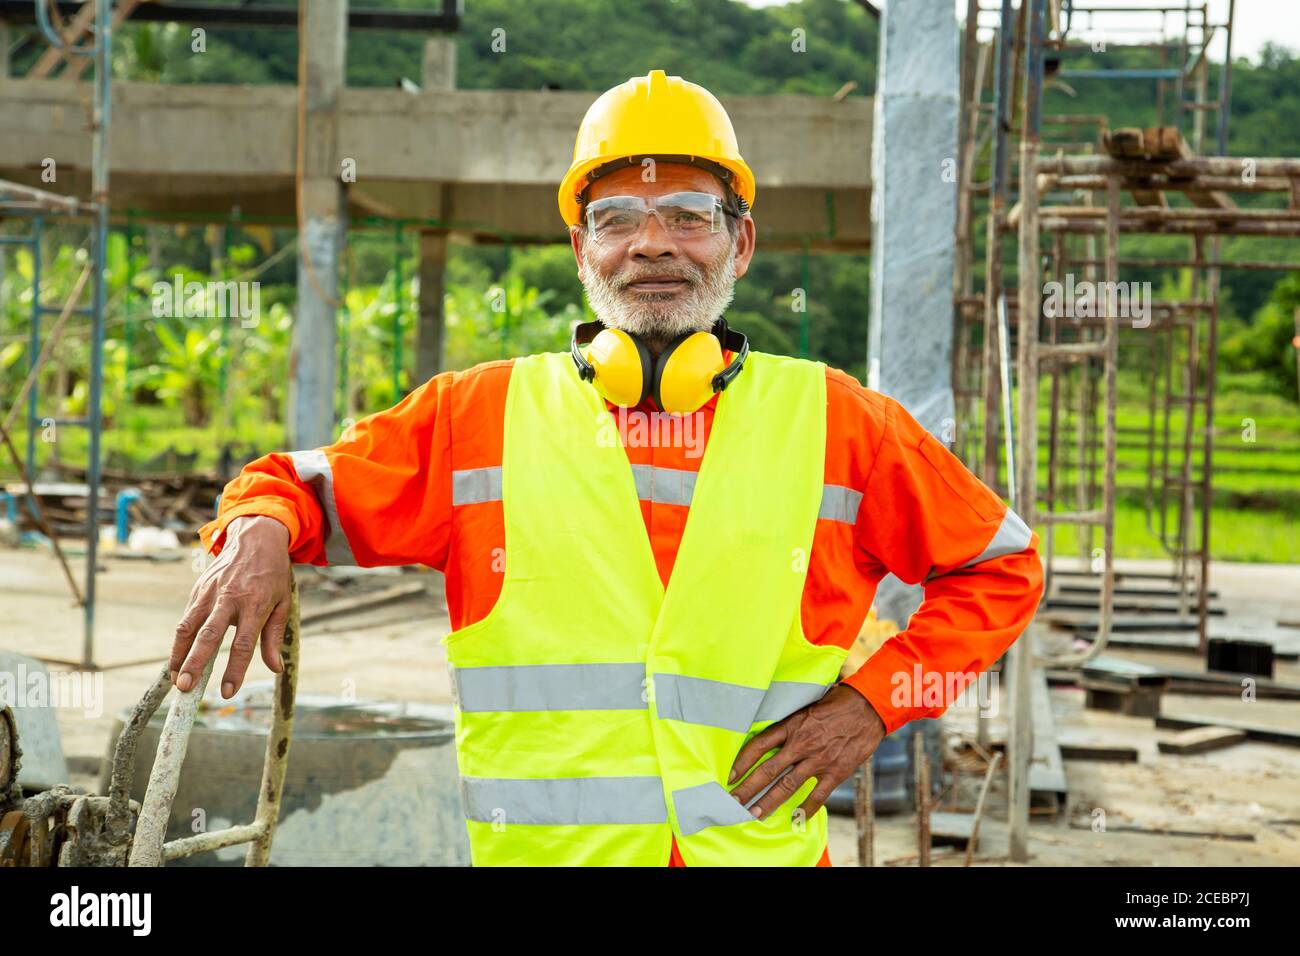 https://c8.alamy.com/comp/2CEBP7J/asian-senior-worker-engineer-wearing-helmet-and-safety-clothes-in-the-house-construction-site-working-elderly-people-concept-2CEBP7J.jpg